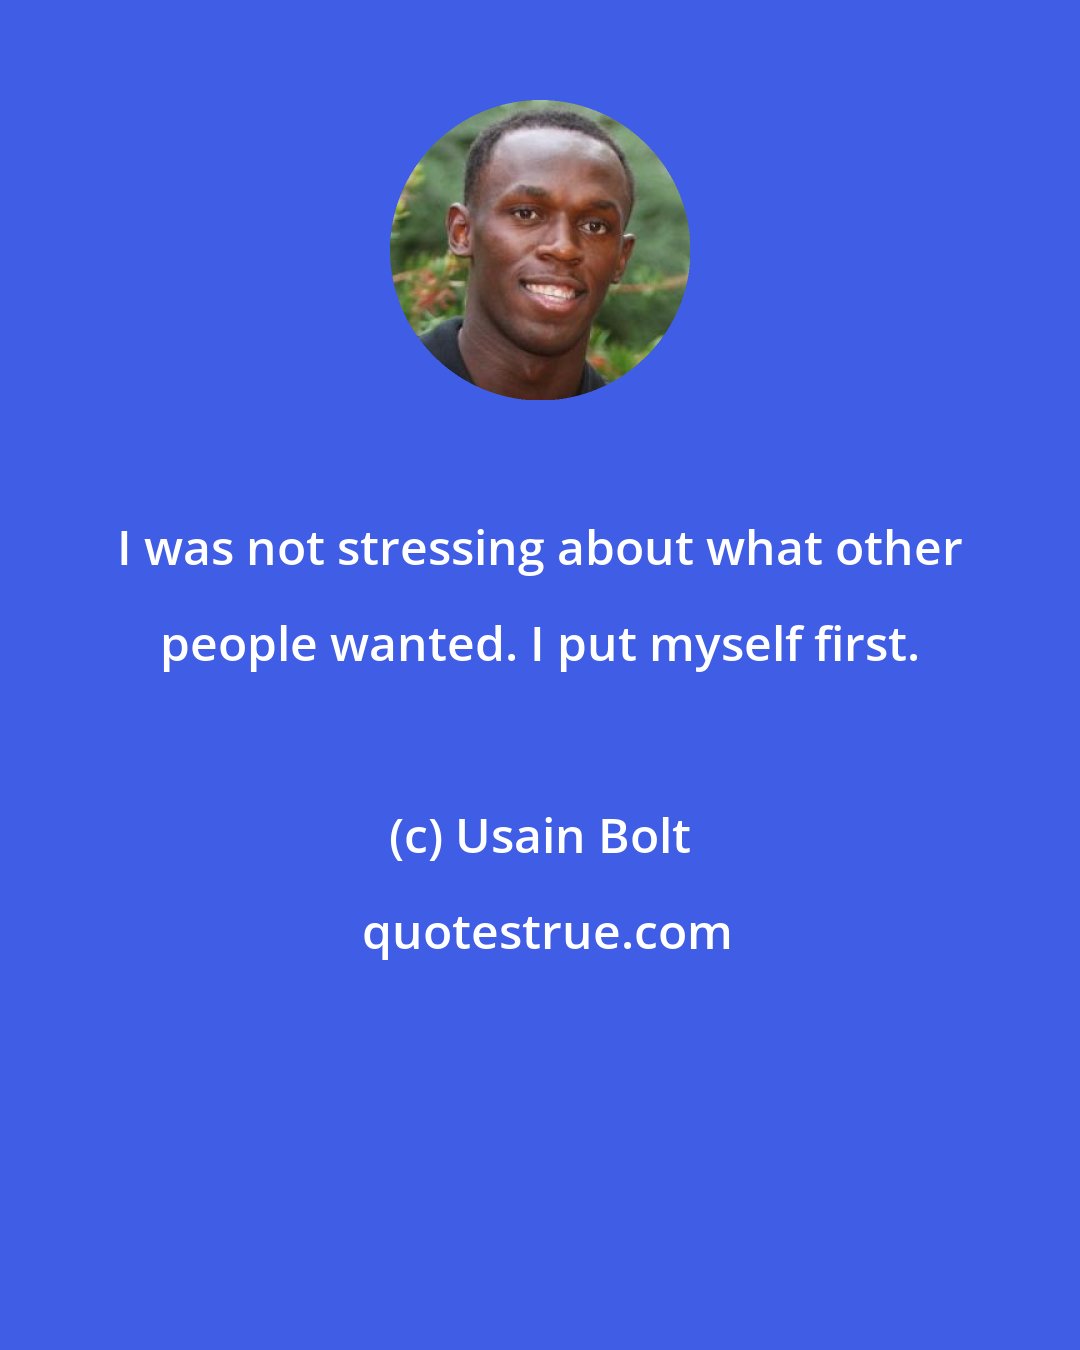 Usain Bolt: I was not stressing about what other people wanted. I put myself first.